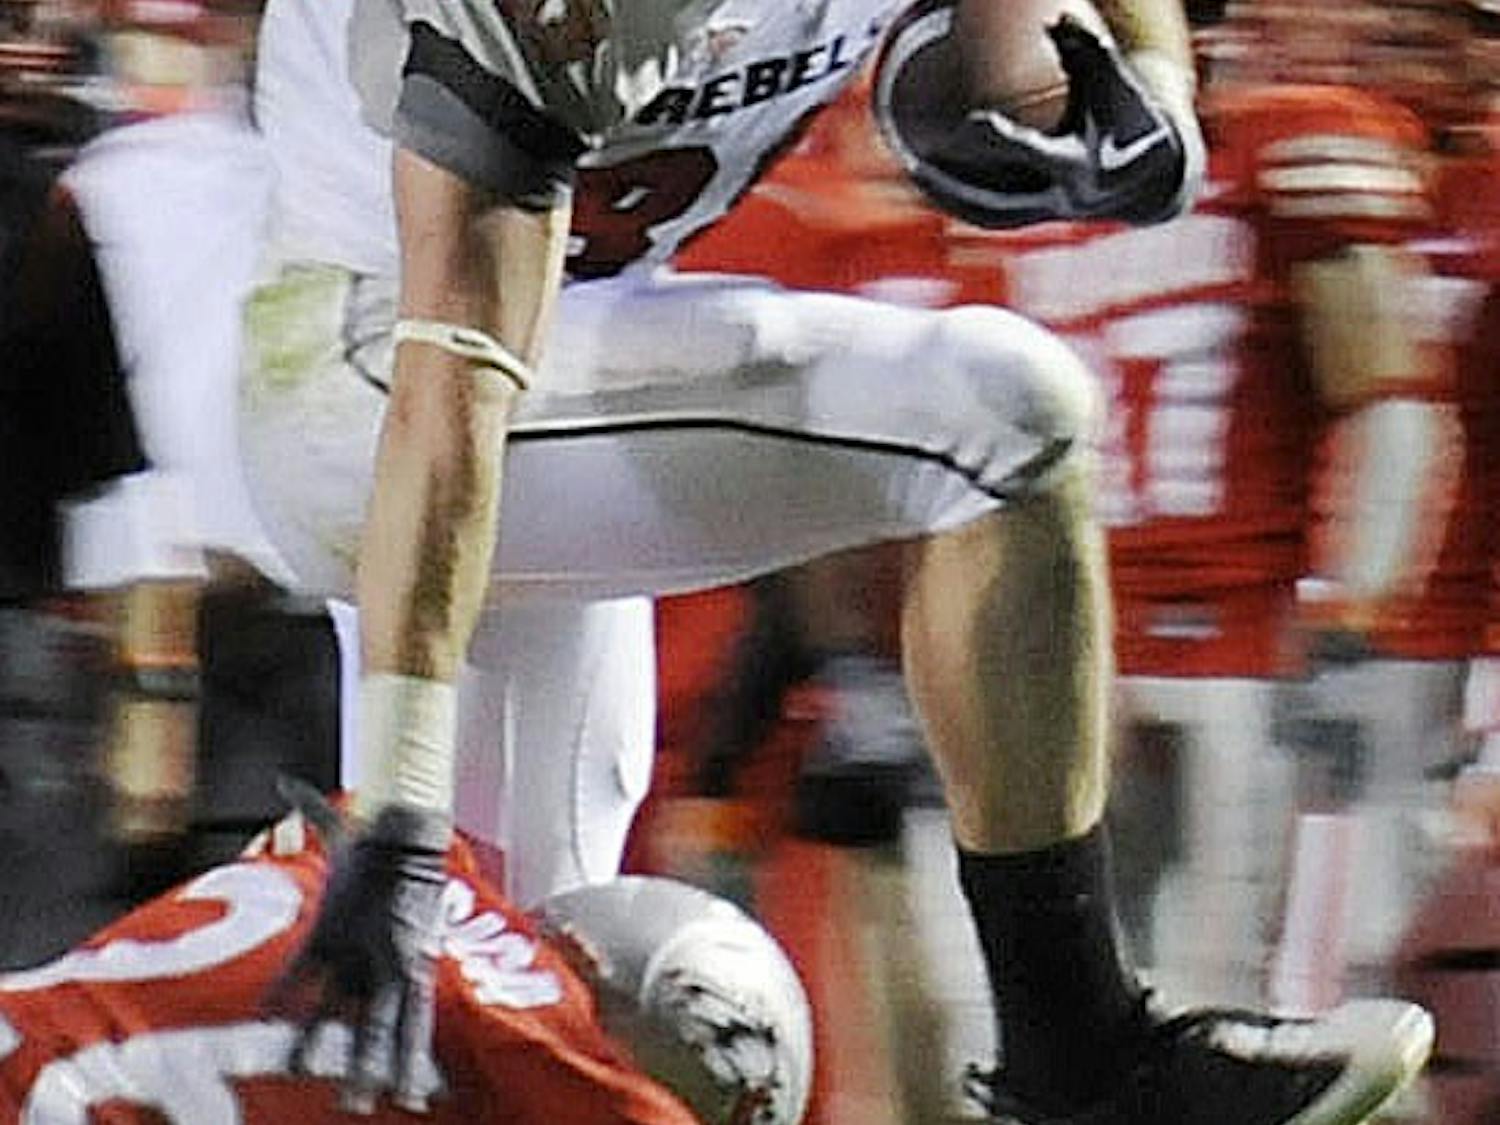 	UNLV wide receiver Ryan Wolfe hurdles over Lobo safety Frankie Baca in Saturday’s 34-17 drubbing at University Stadium. Wolfe had 11 receptions for 118 yards.